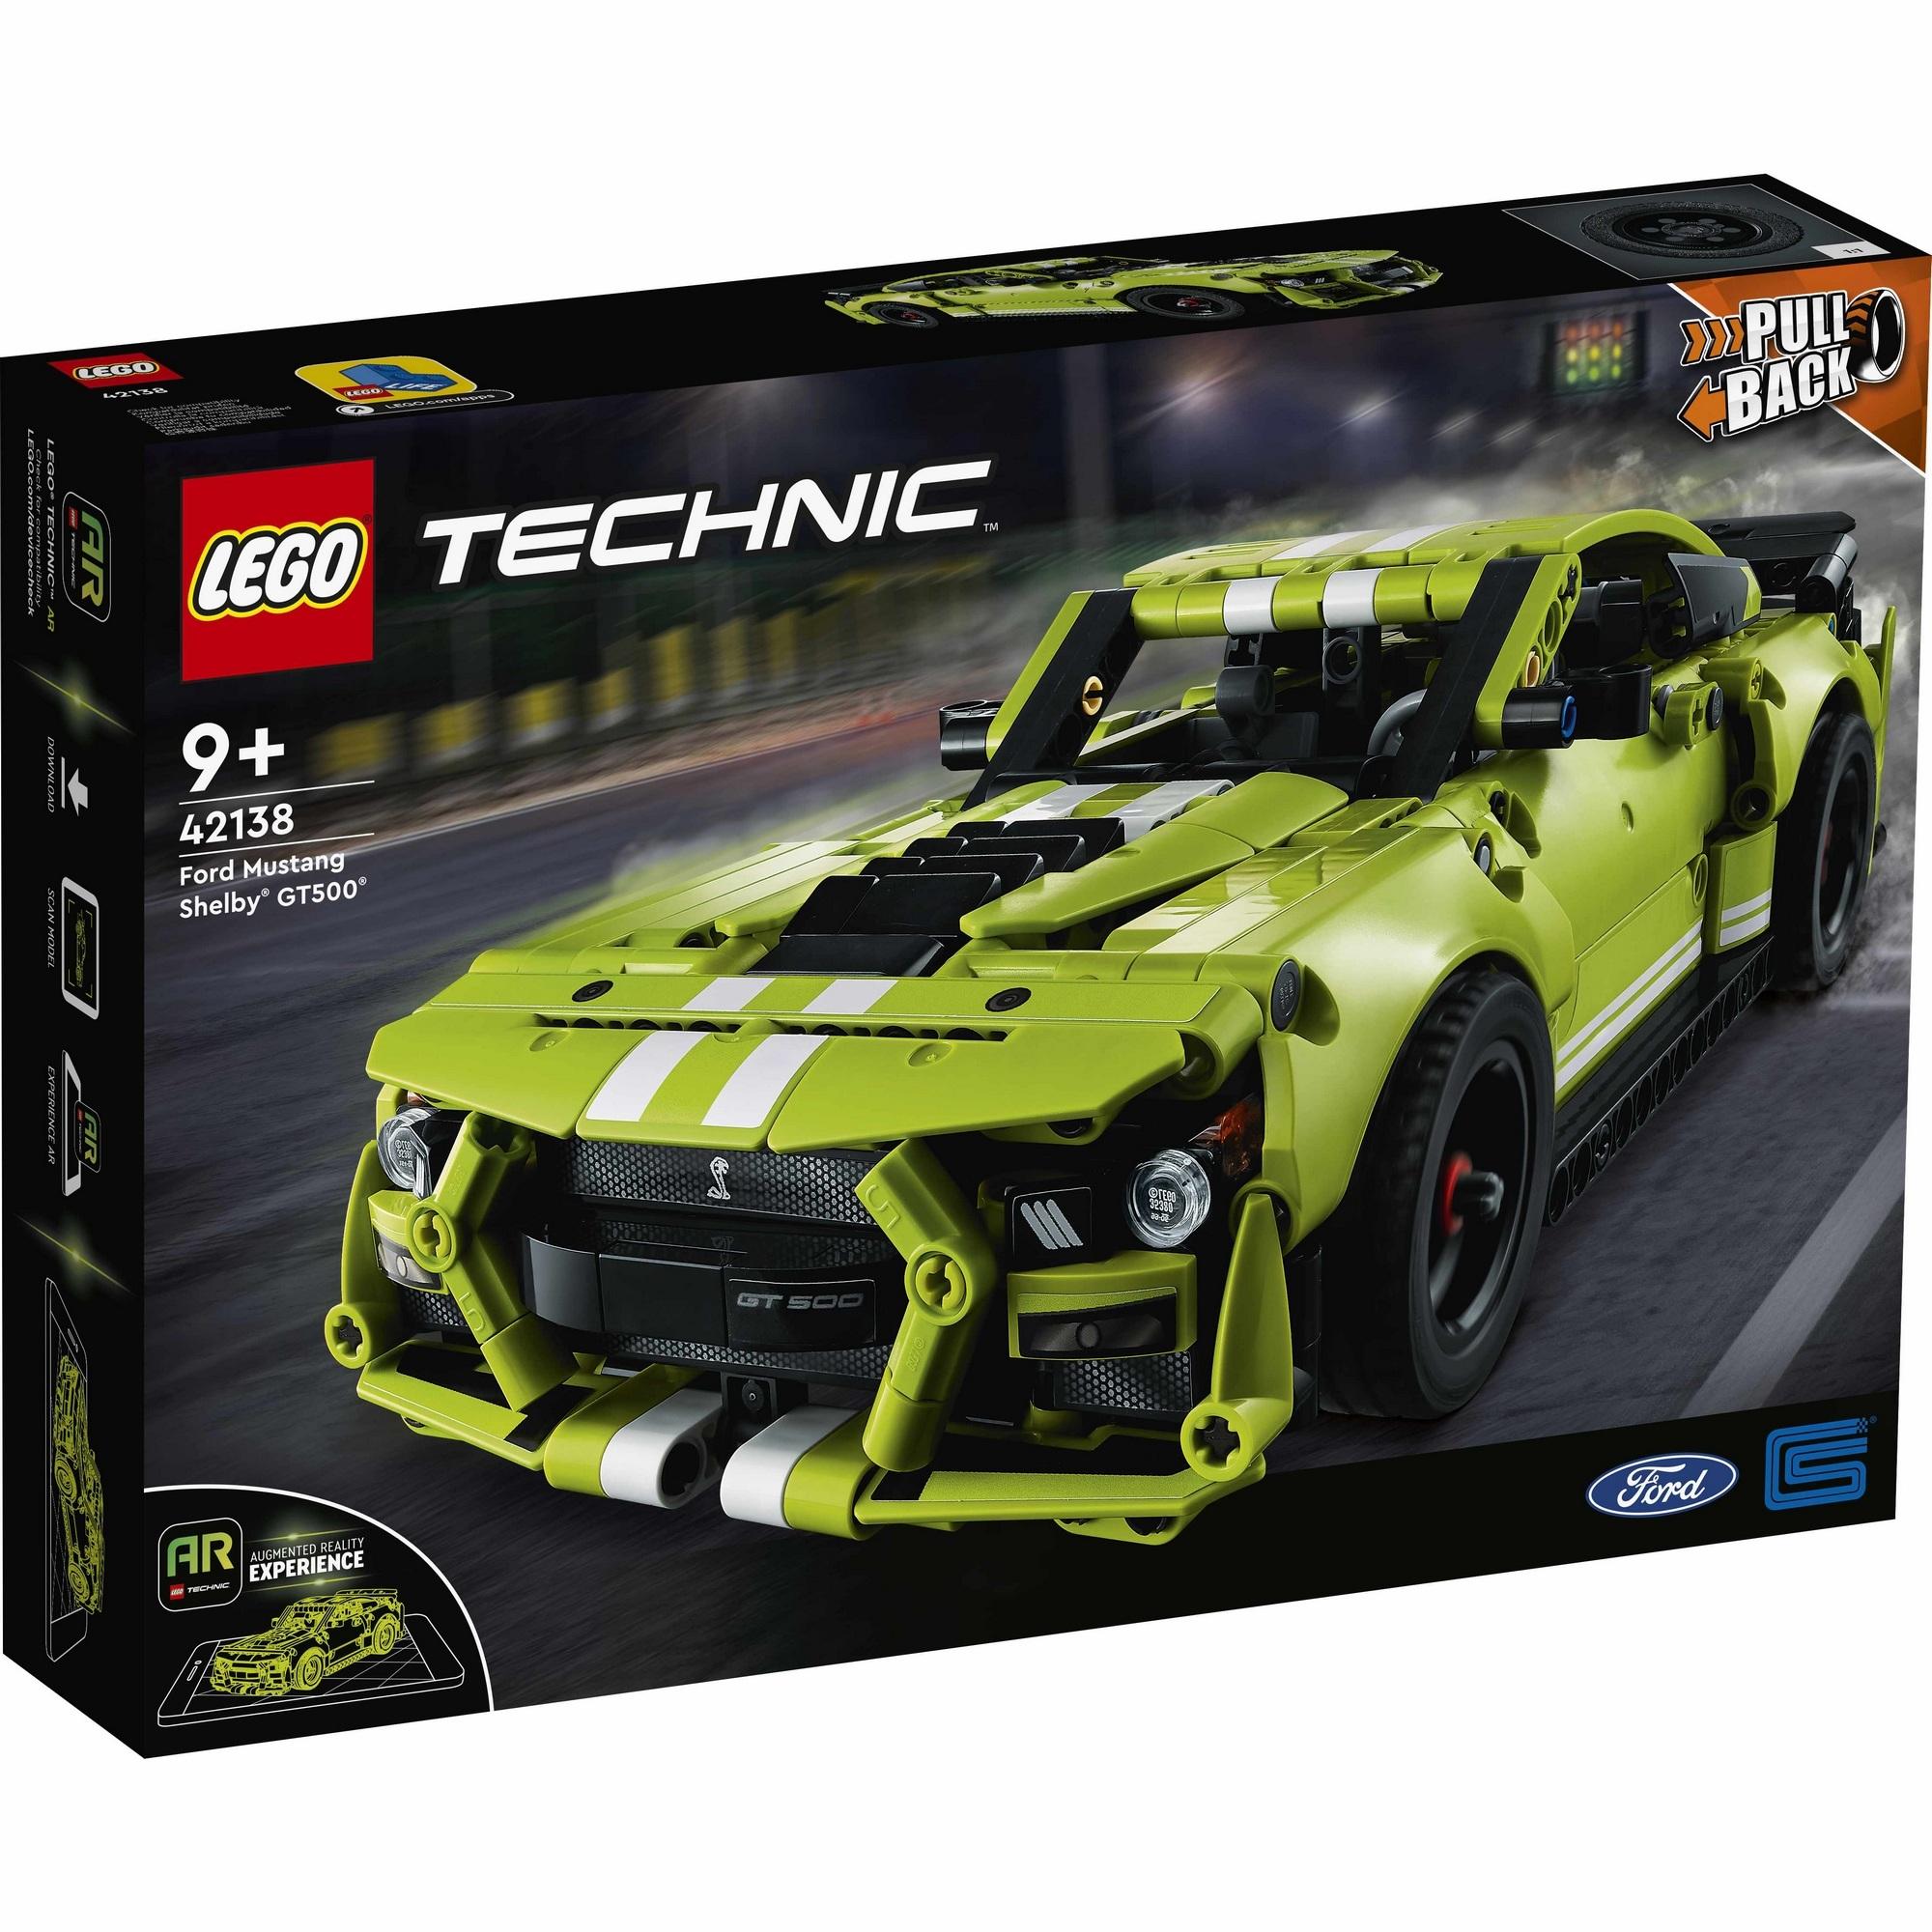 LEGO Technic 42138 Xe Ford Mustang Shelby GT500 (544 chi tiết)